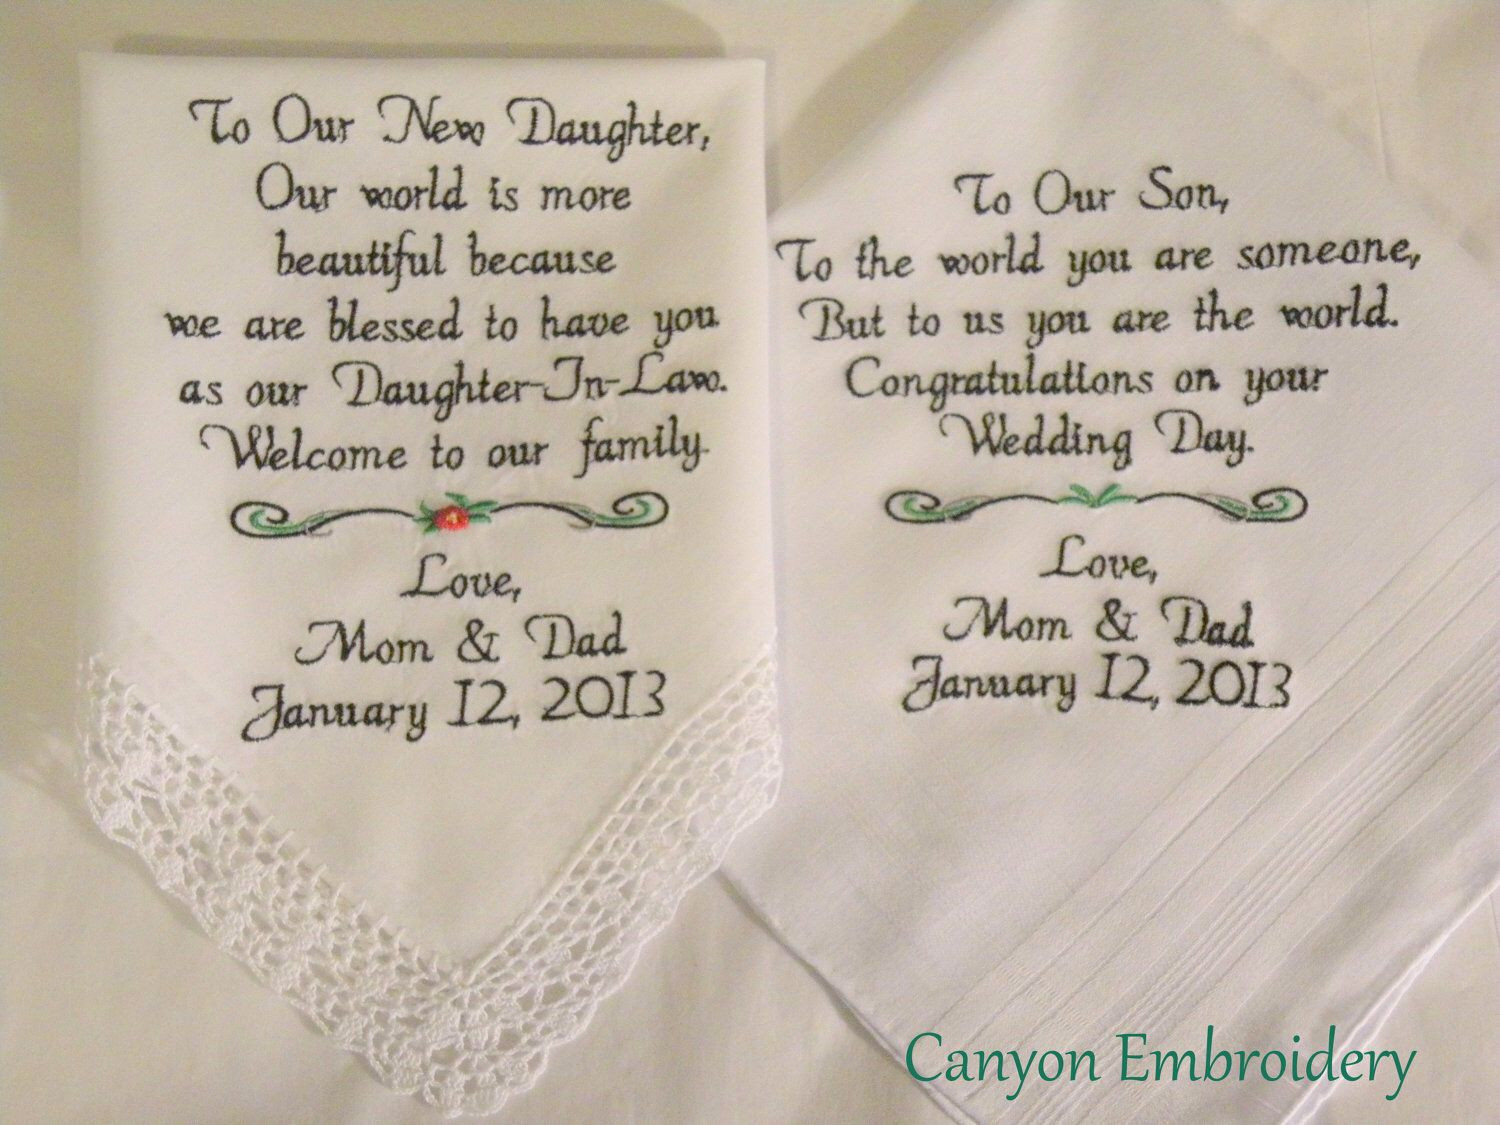 Mother To Daughter Wedding Gift Ideas
 New Daughter Son Wedding Gift From Mom and Dad to the